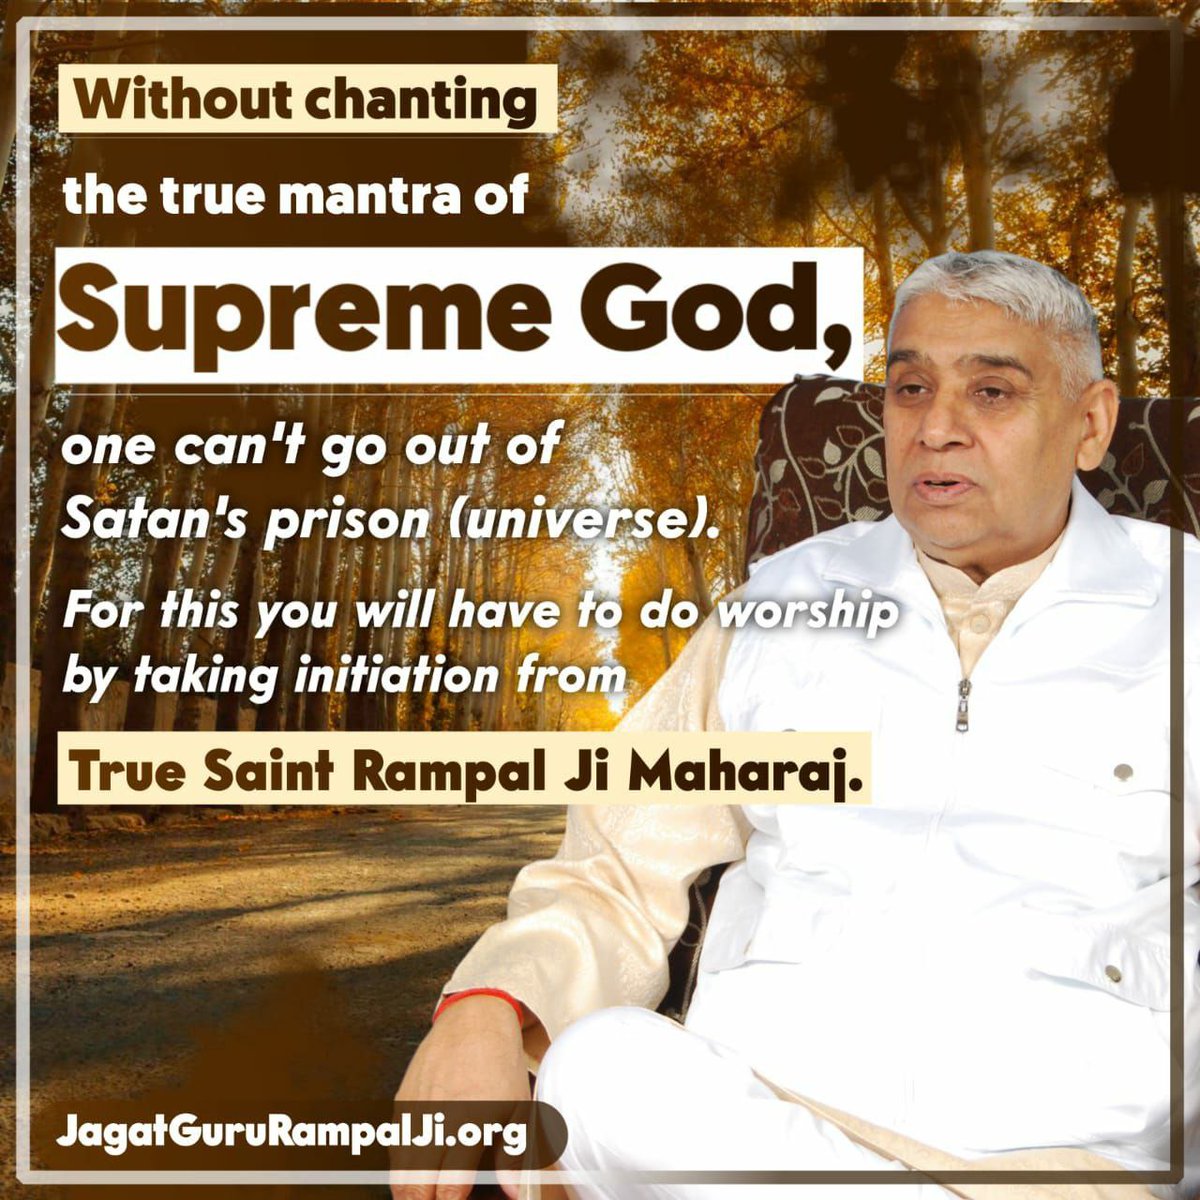 #GodMorningSSunday 
Without Chanting
the true mantra of
Supreme God, 
one can't go out of Satan's prison (universe).
For this you will have to do by taking initiation from
True Saint Rampal Ji Maharaj.
Visit our Saint Rampal Ji Maharaj YouTube Channel
#SundayMotivation